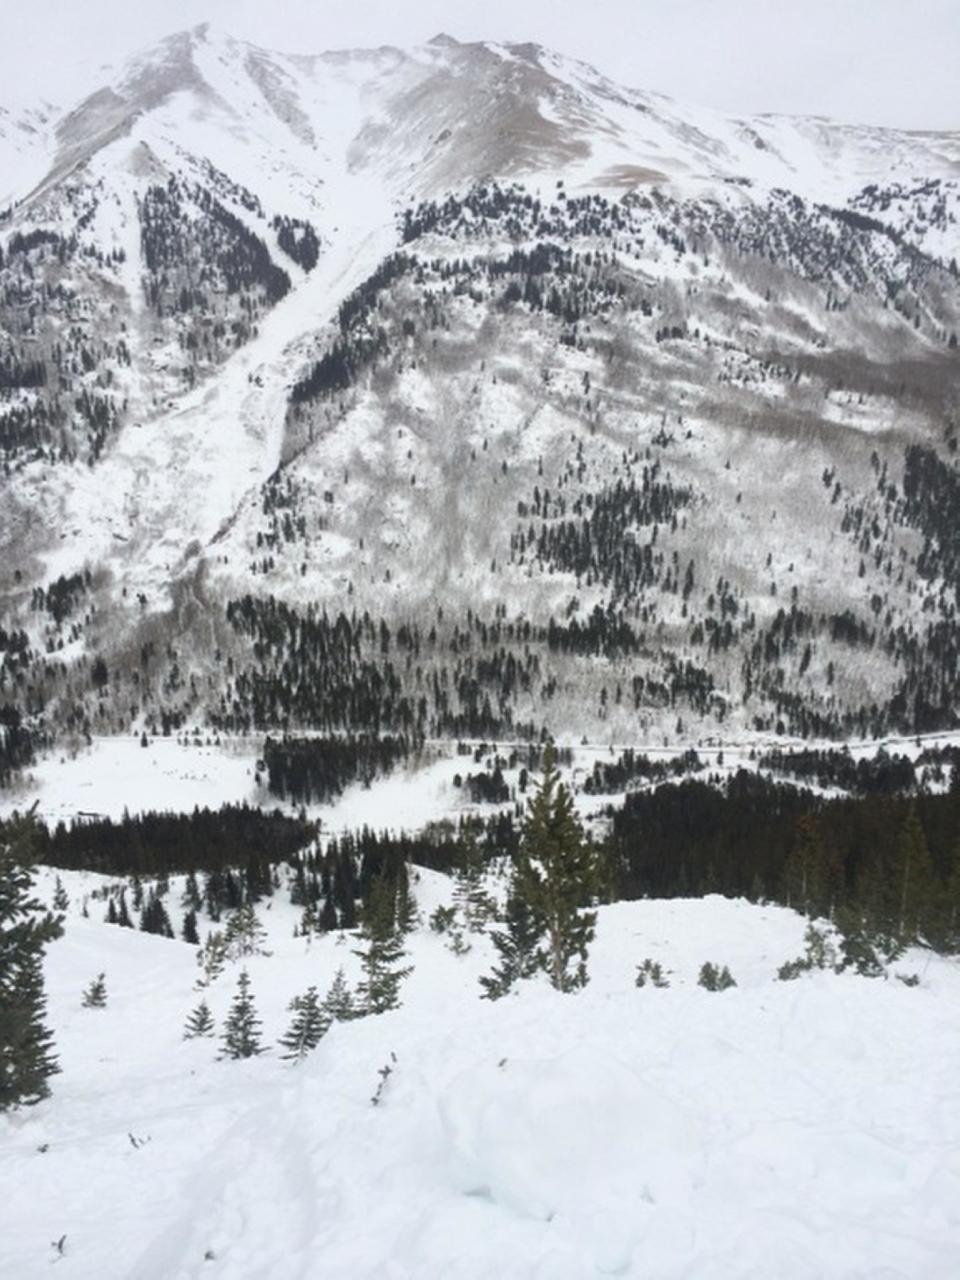 This photo released by the Colorado Avalanche Information Center show the area of an avalanche that killed two skiers on Saturday, Feb. 15, 2014. Three other skiers were hospitalized following Saturday's avalanche near Leadville, Colo. Rescue crews found the two skiers' bodies Sunday Feb. 16, near Independence Pass, about 80 miles southwest of Denver, the Lake County Sheriff's Office said. (AP Photo/Colorado Avalanche Information Center)